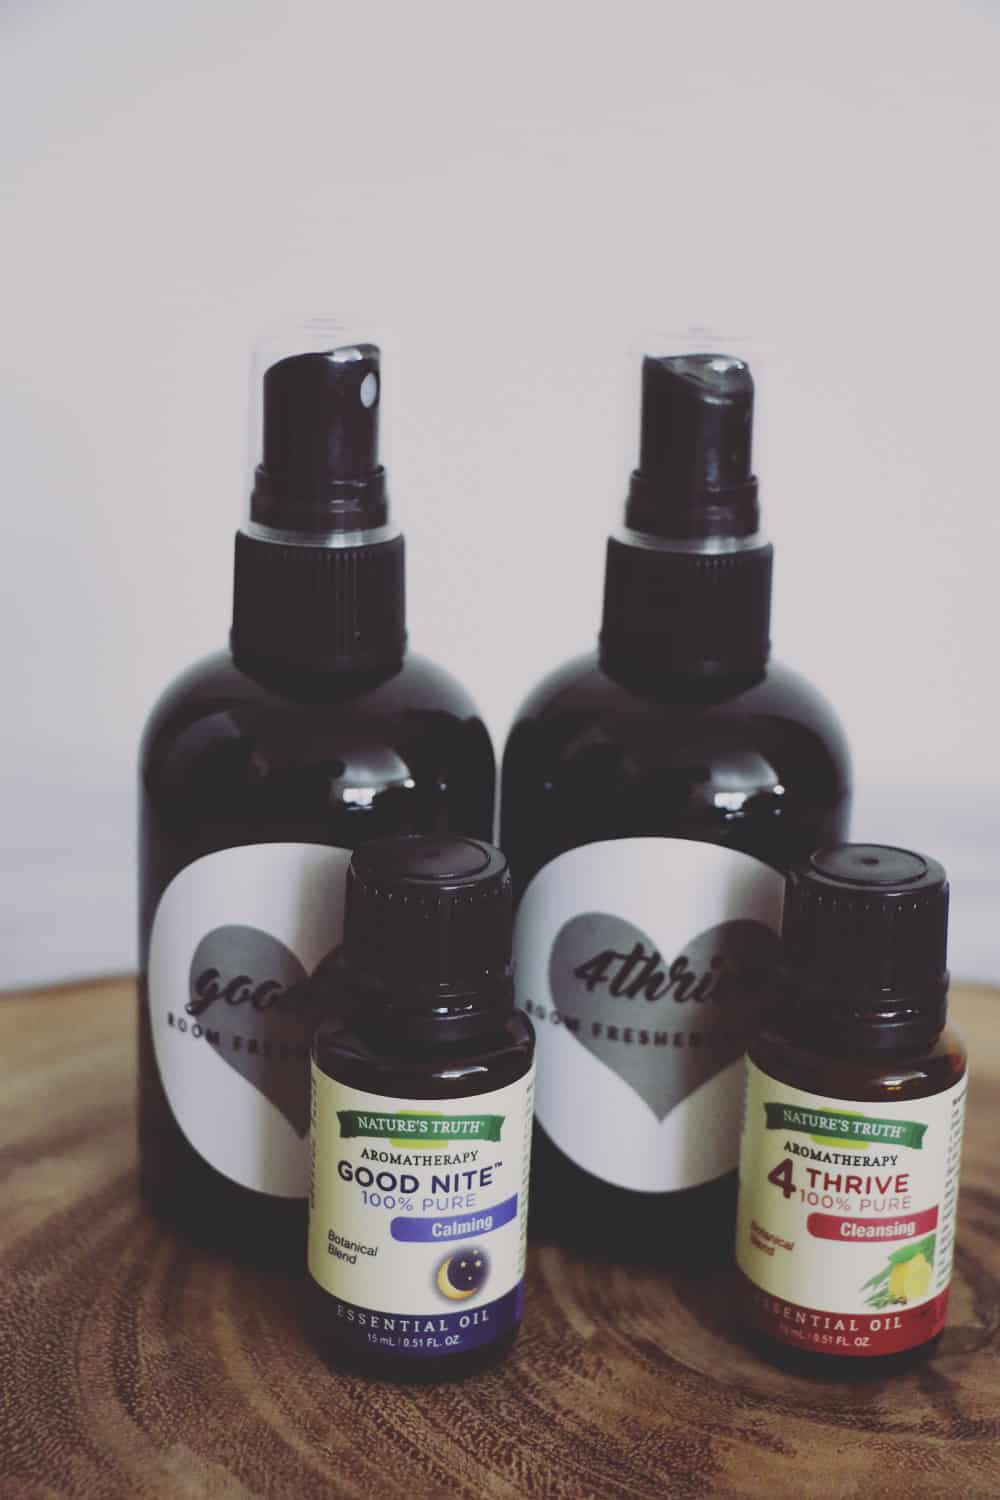 Looking to make a unique gift? Or an easy way to refresh your home? This simple DIY Room Freshener Spray is the perfect homemade solution!